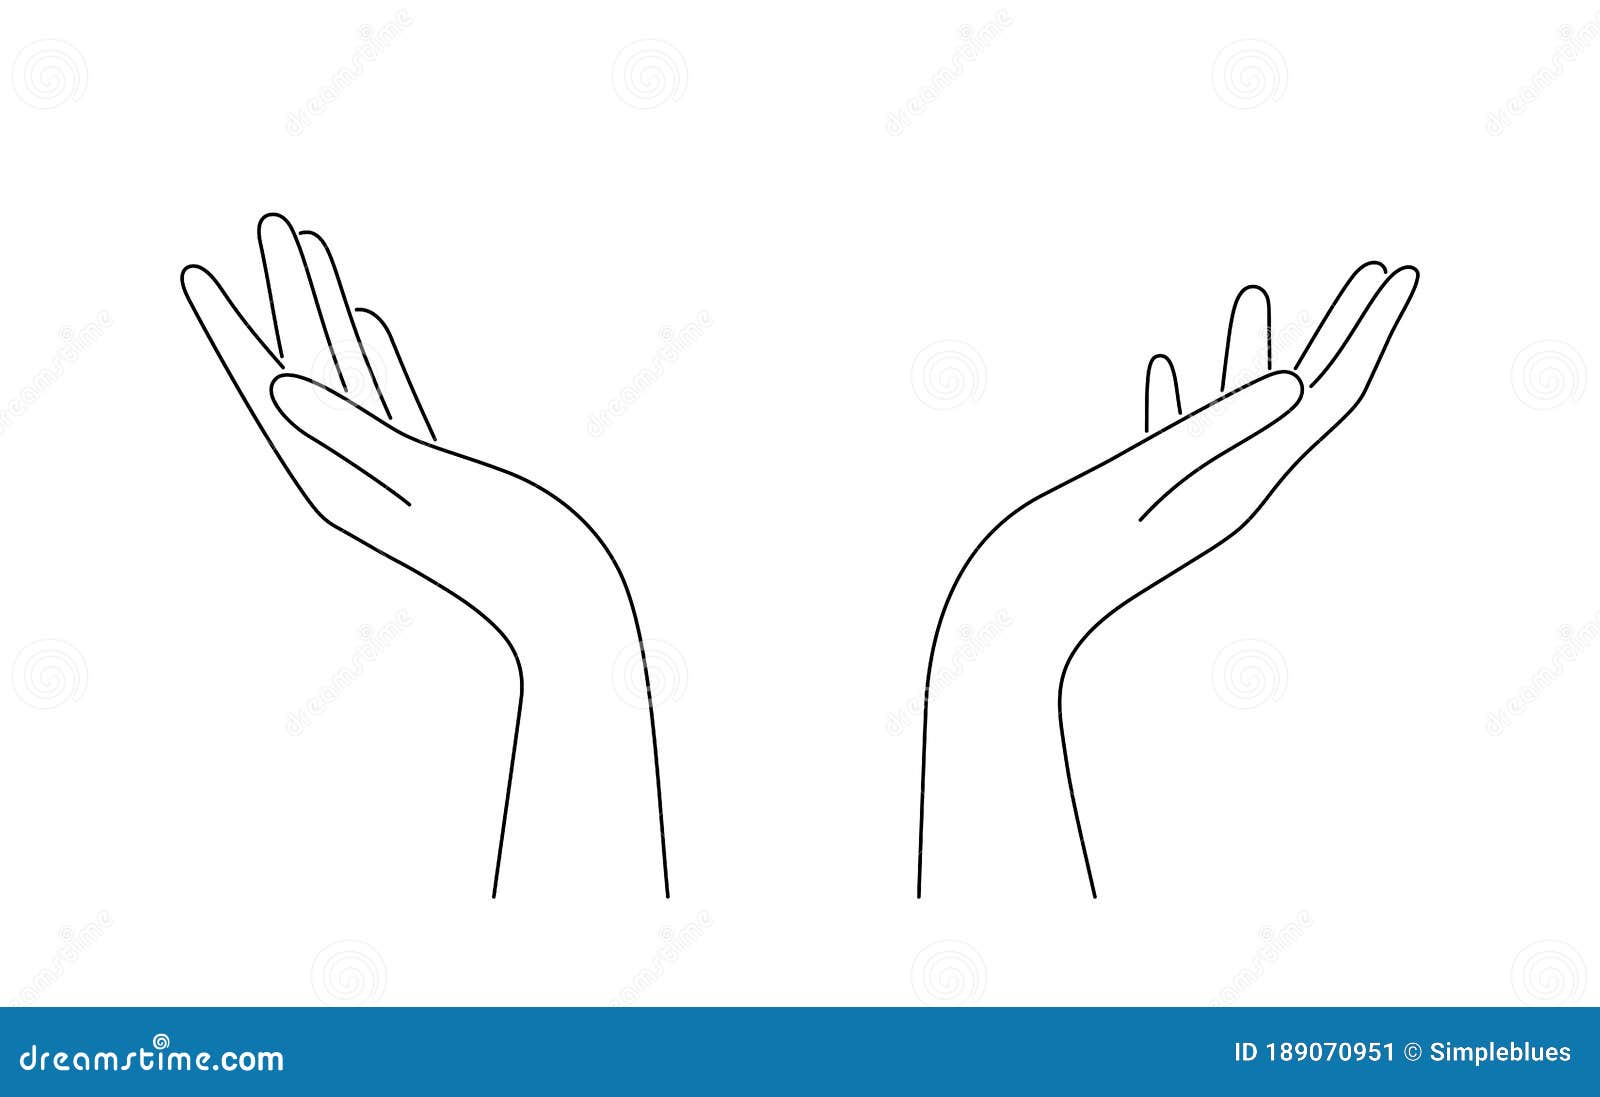 Outline Hands Reaching Stock Illustrations 193 Outline Hands Reaching Stock Illustrations Vectors Clipart Dreamstime